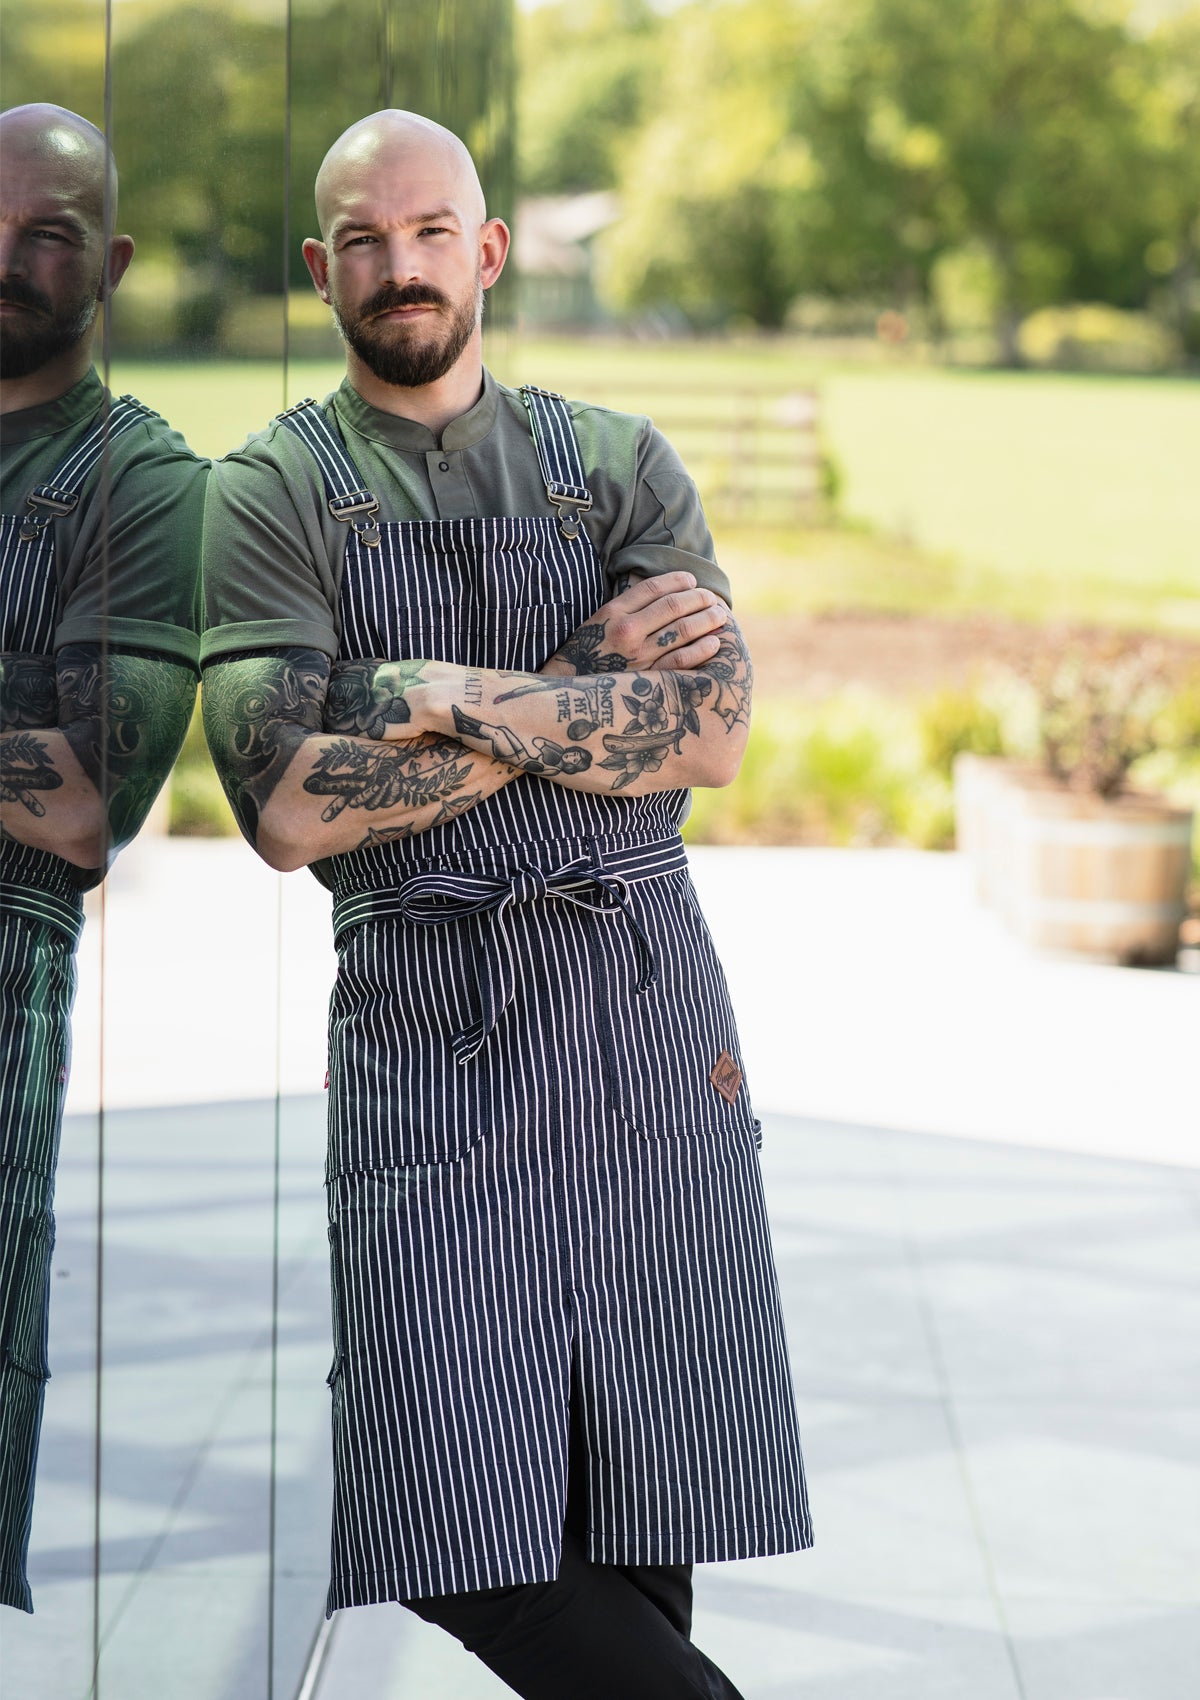 Cookniche  Highest-quality chef clothing and service uniforms